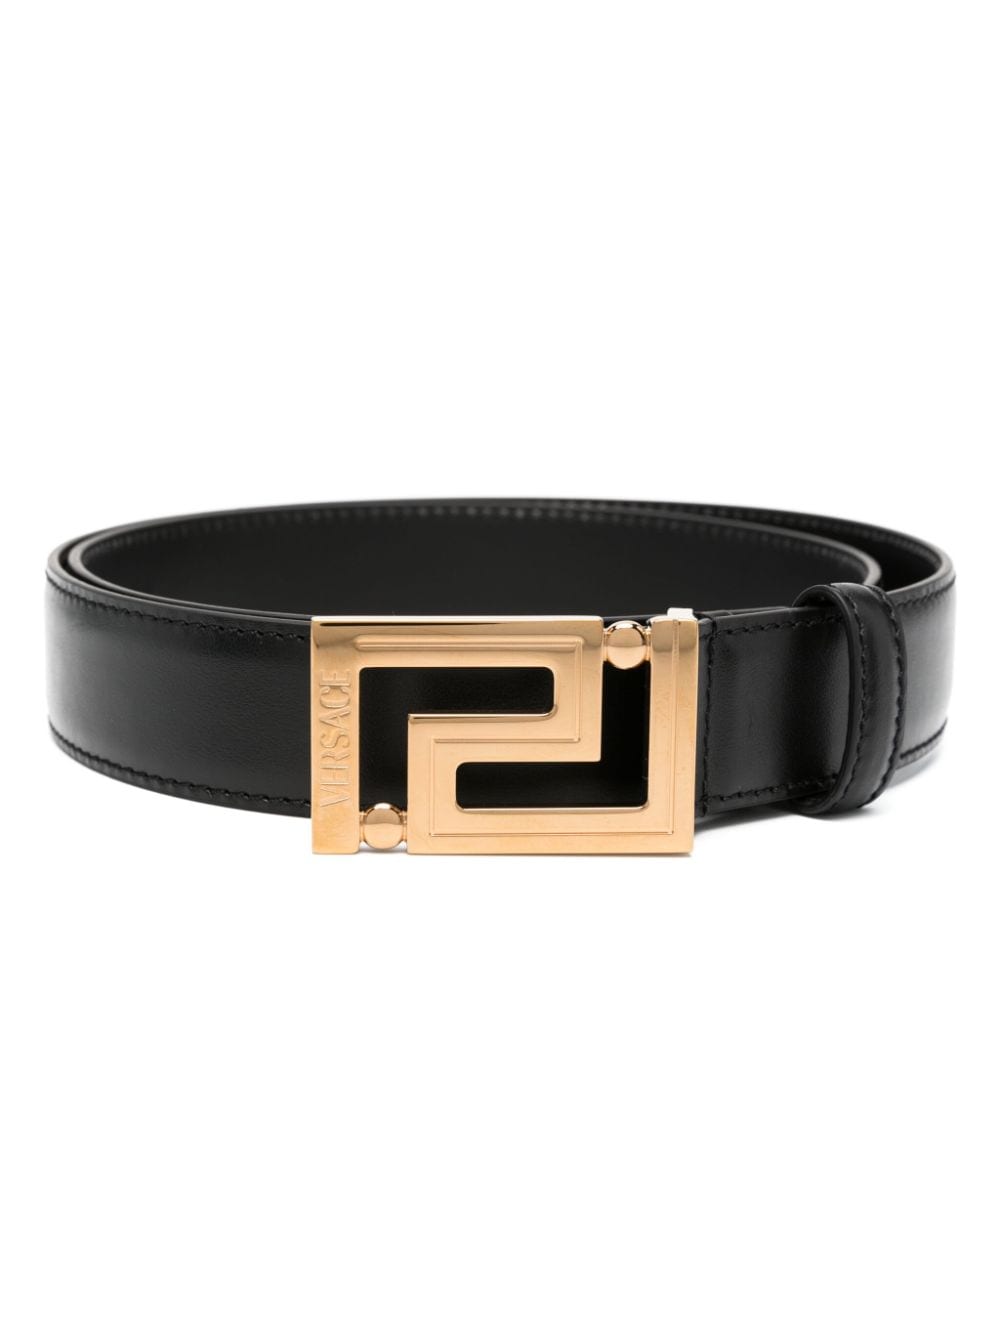 Black Thin Belt With Leather Loop And D Ring - AMI PARIS OFFICIAL LV